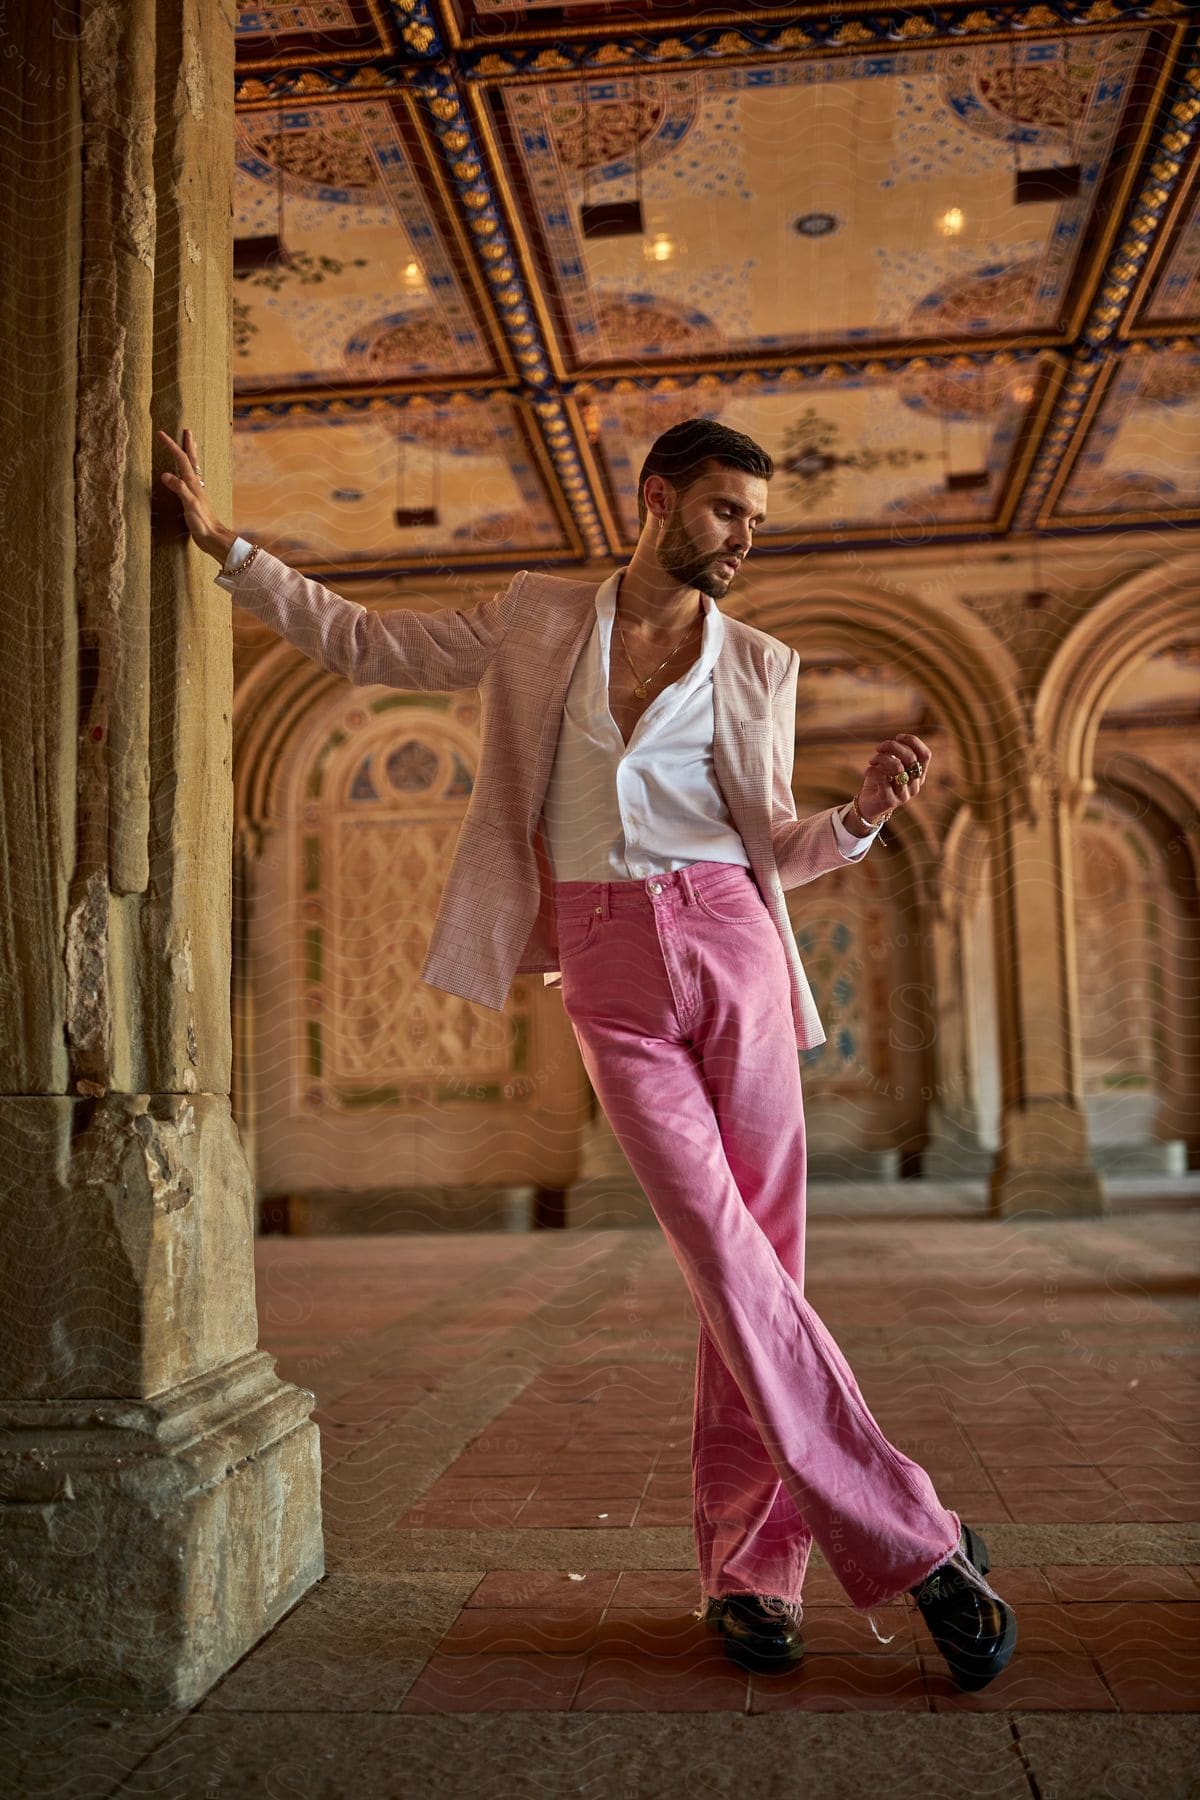 Man in pink trousers and beige blazer leaning against stone pillar, ornate ceiling overhead.